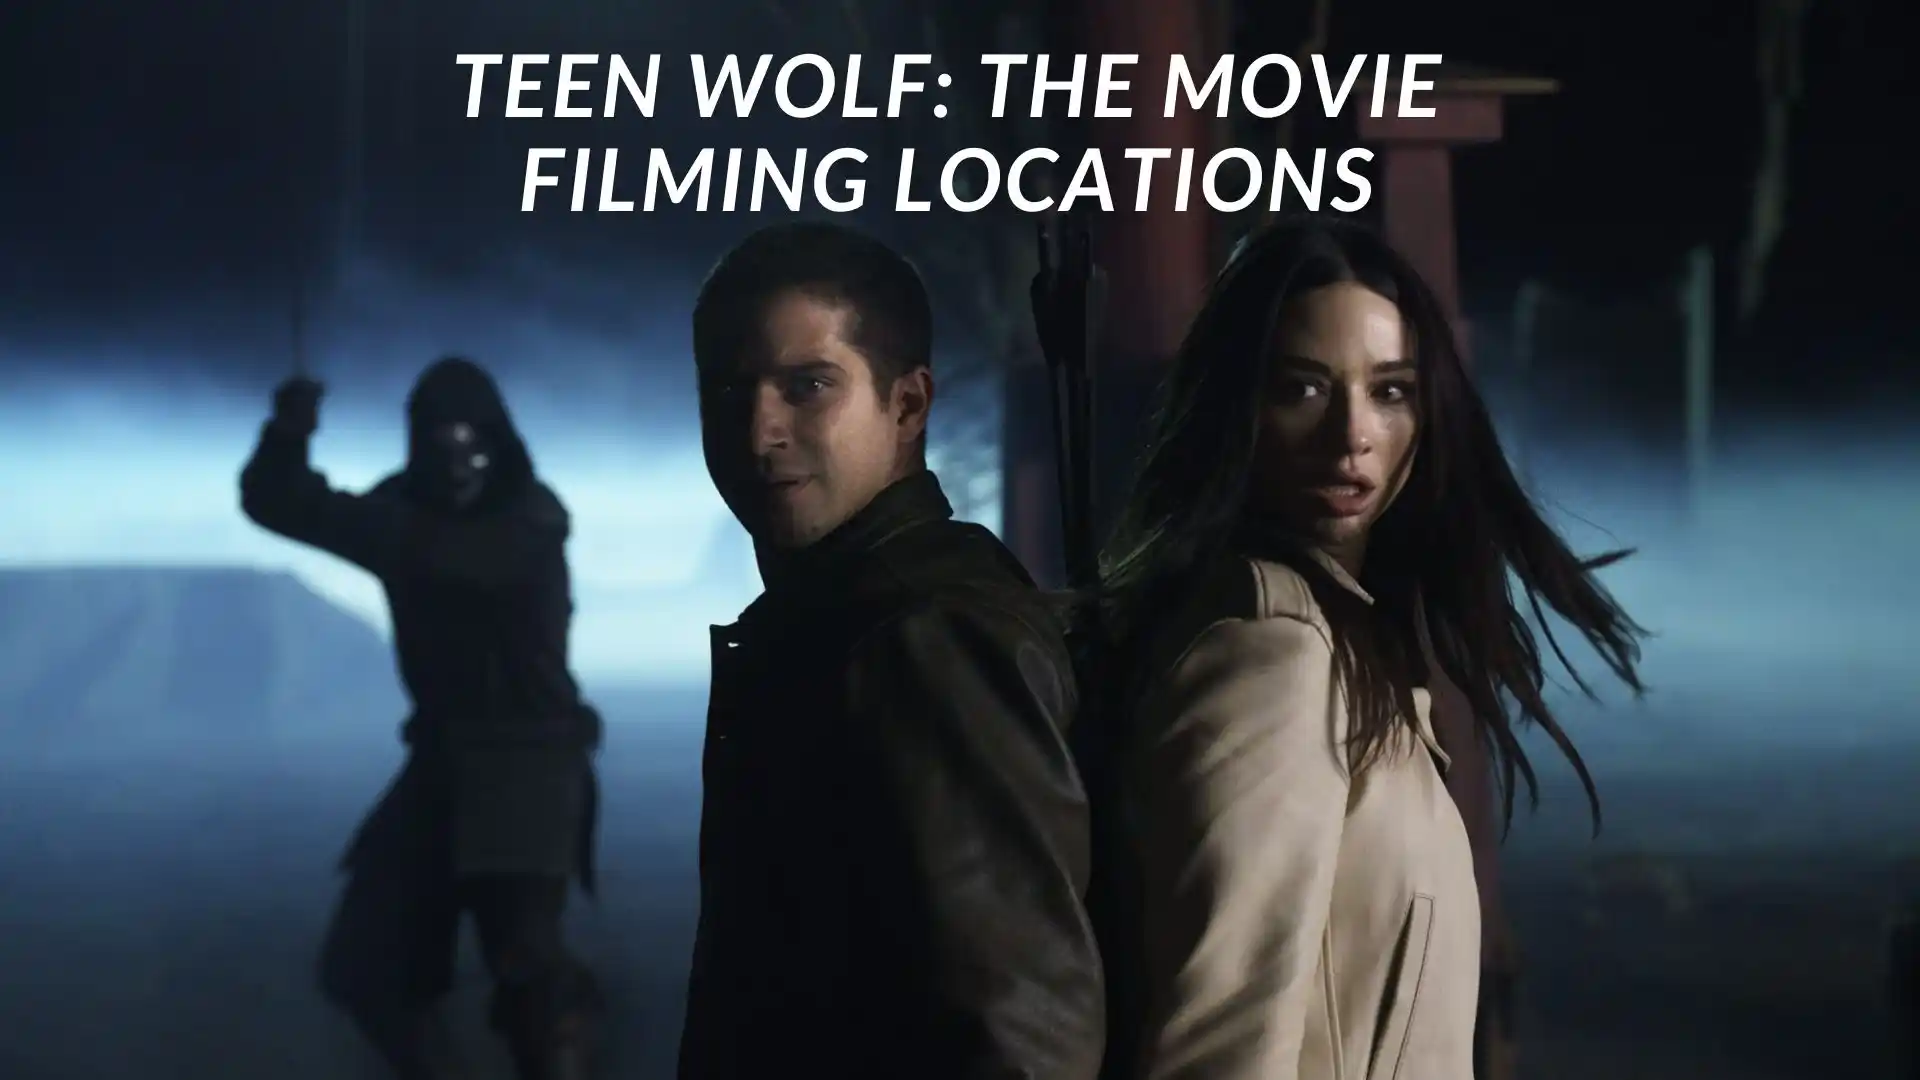 Teen Wolf: The Movie Filming Locations